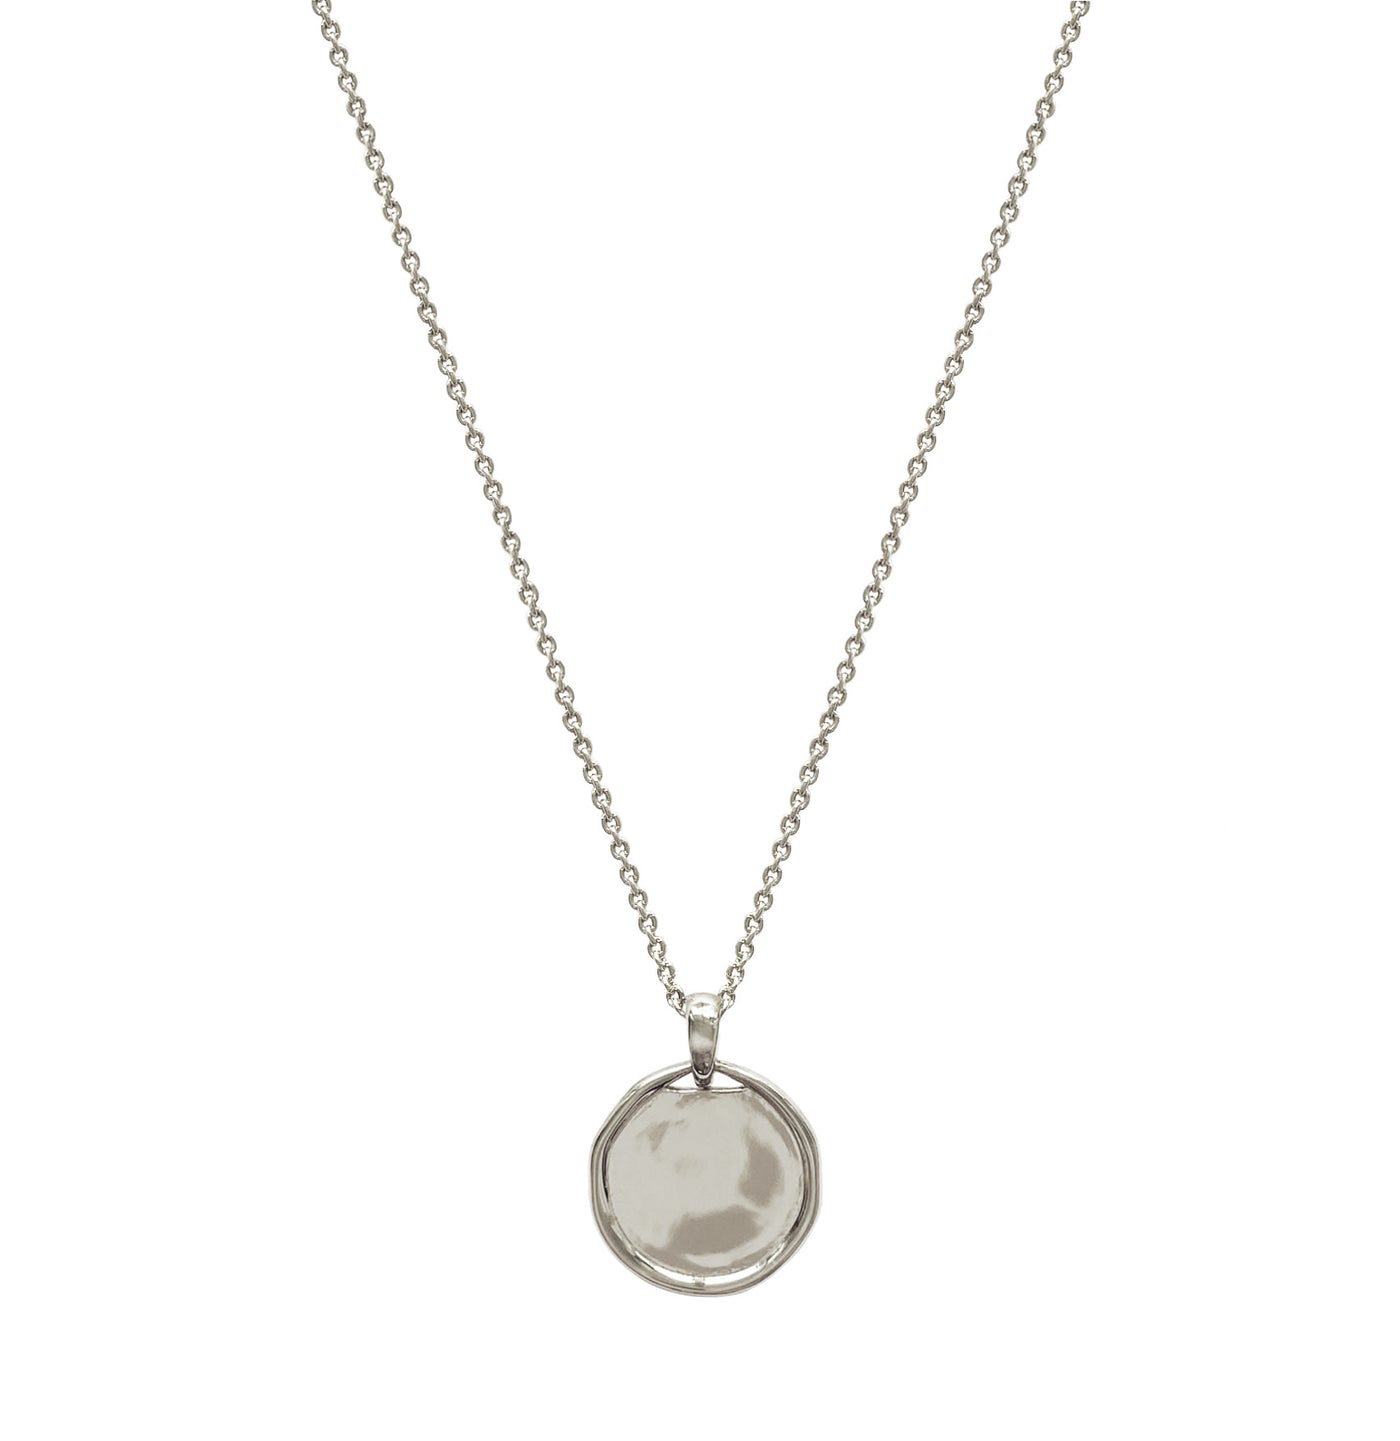 Sterling silver plain coin pendant necklace